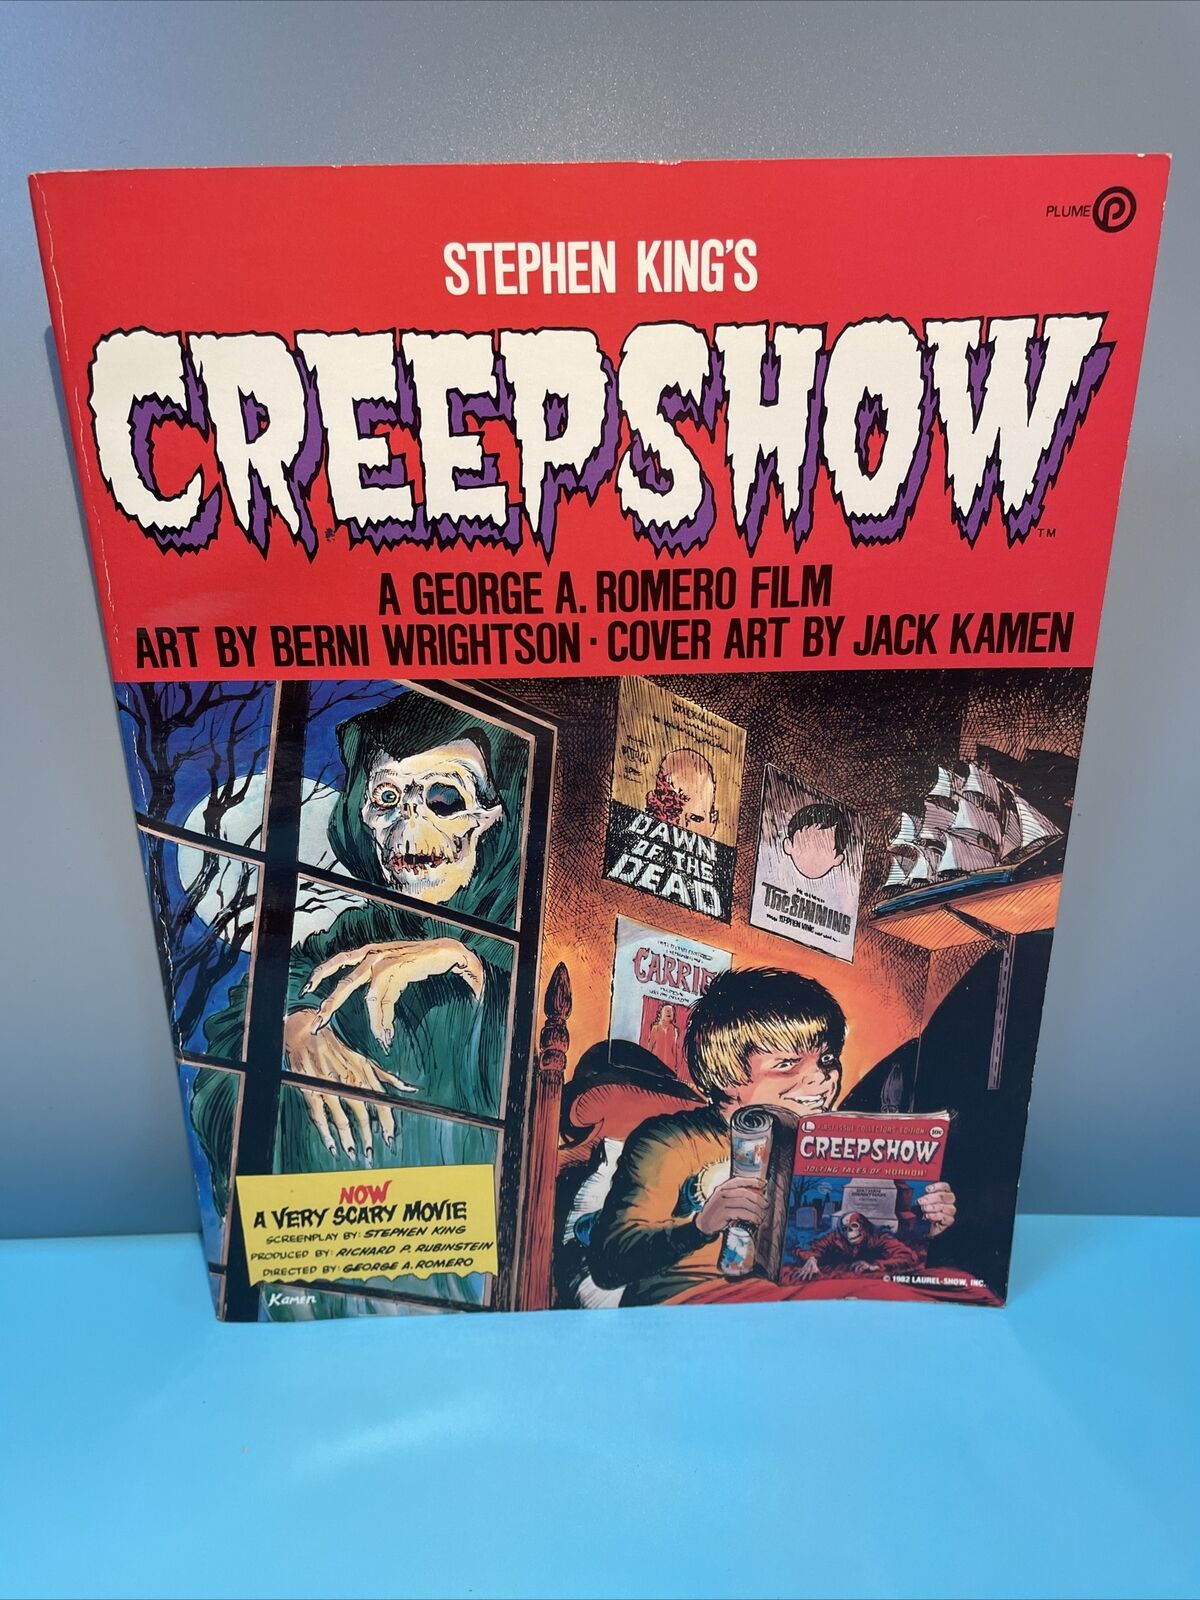 STEPHEN KING’S CREEPSHOW- PLUME FIRST PRINTING JULY 1982 -UNREAD-NEAR MINT